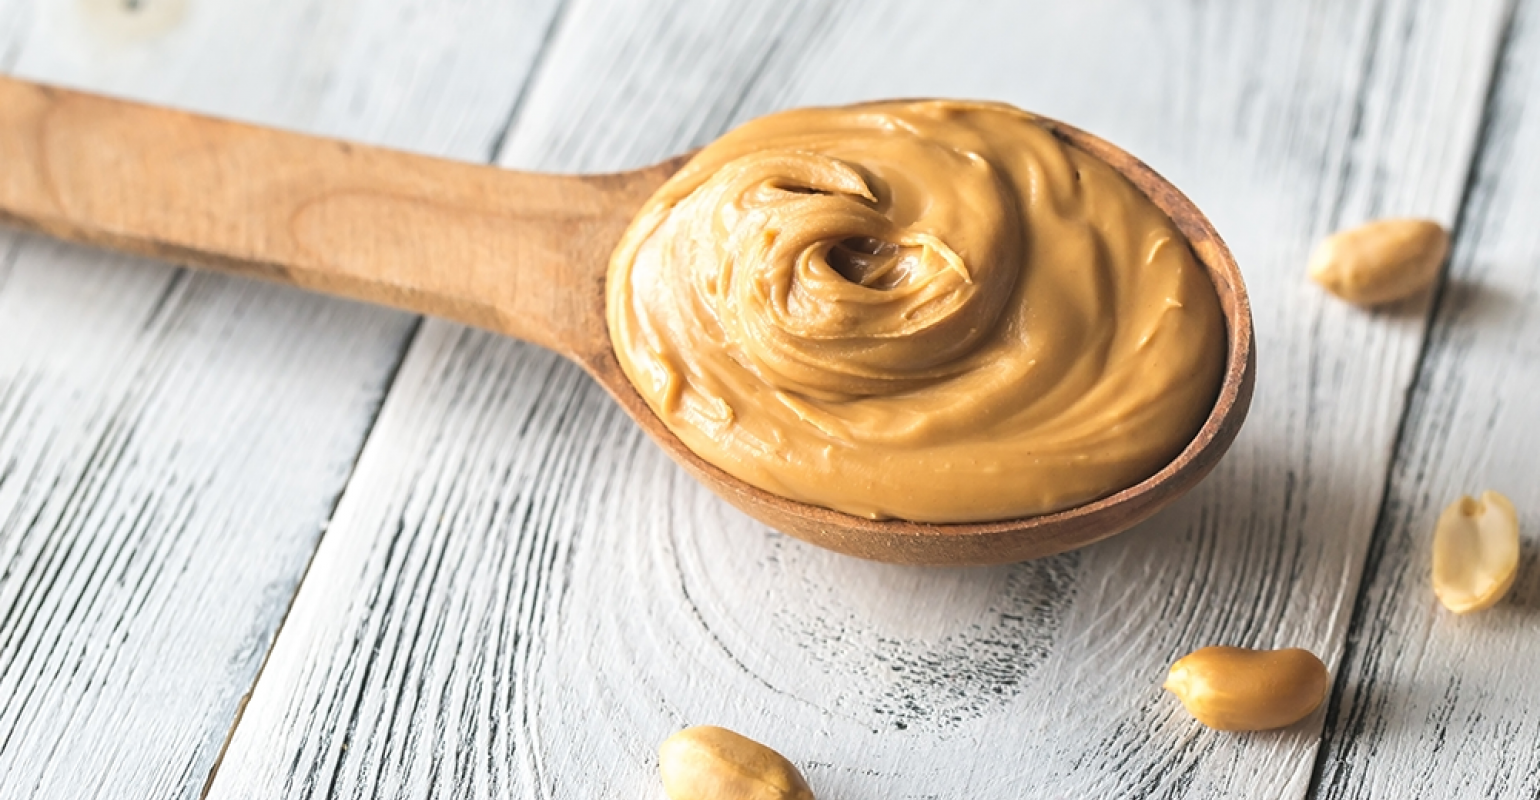 https://www.supermarketnews.com/sites/supermarketnews.com/files/styles/article_featured_retina/public/peanut-butter-products-spoon.png?itok=px9W0zPK